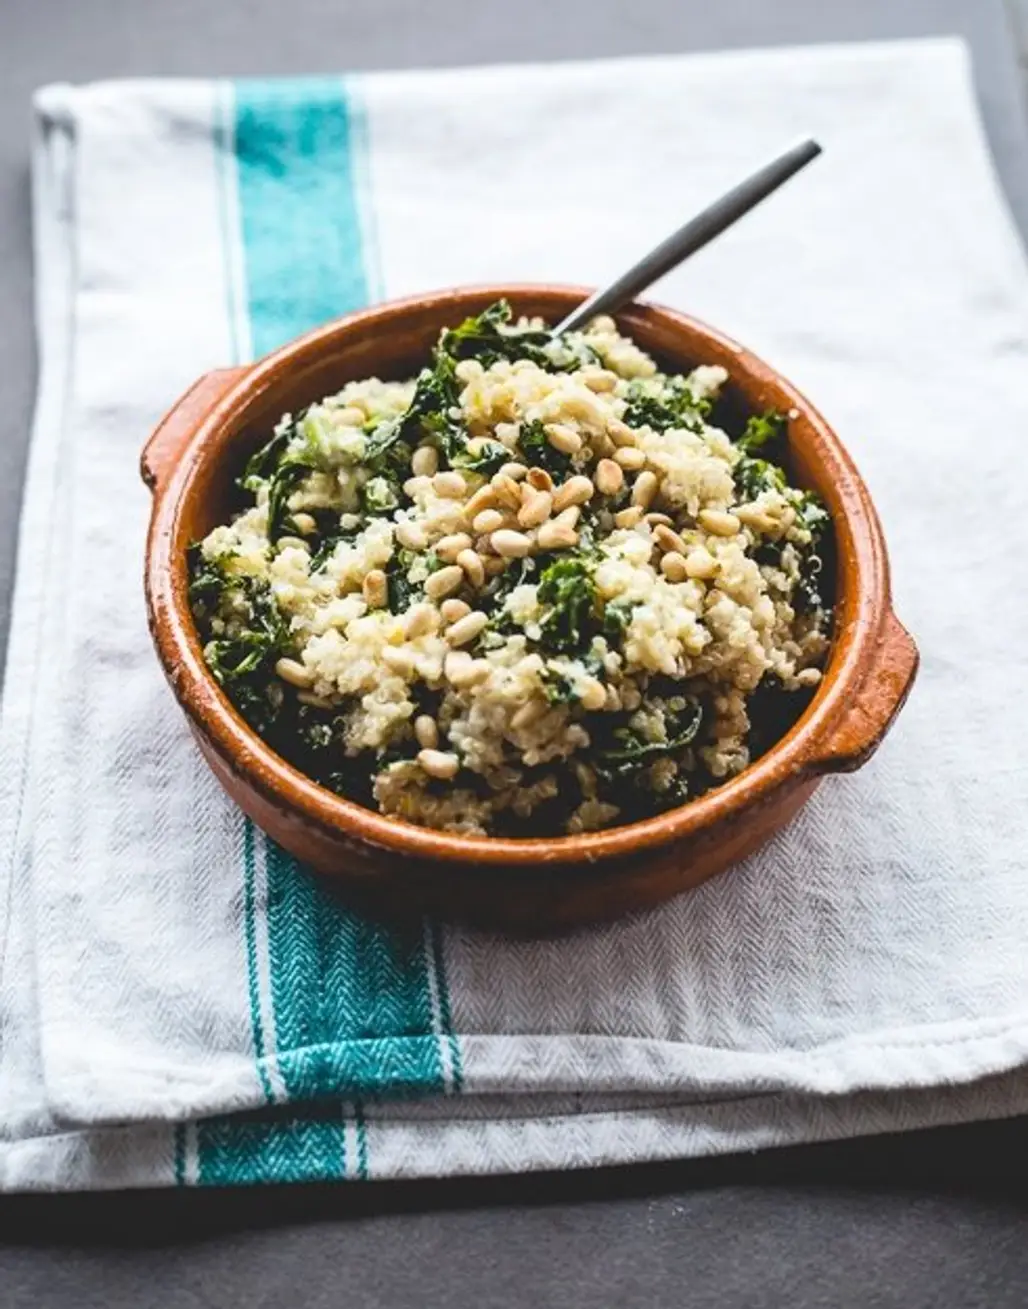 20-Minute Kale and Quinoa Bowl